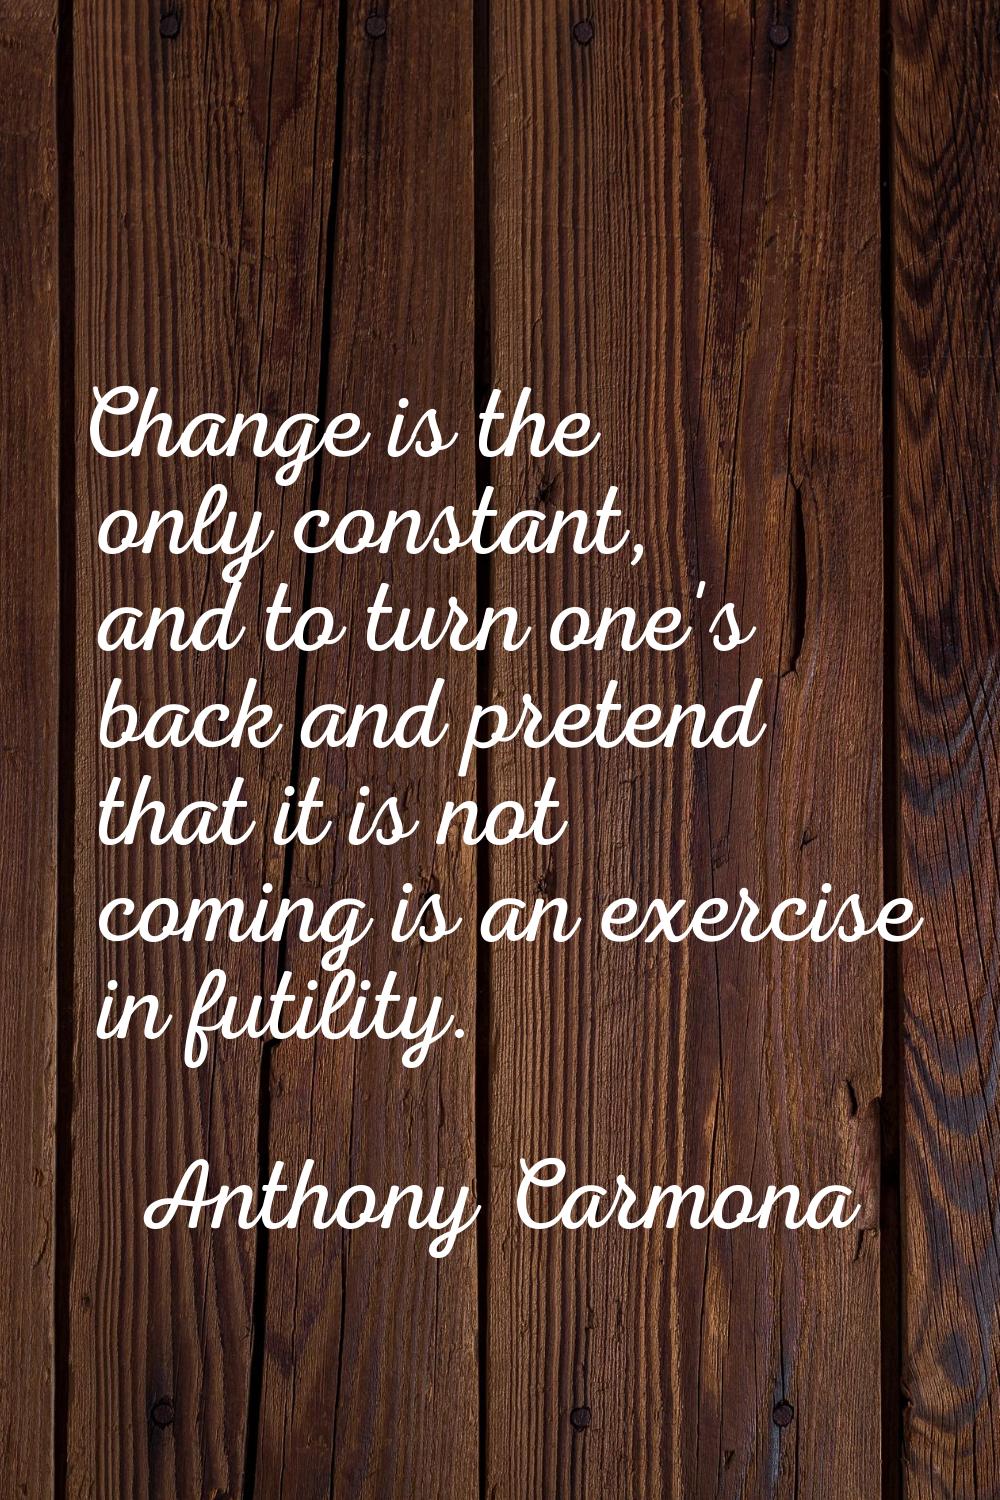 Change is the only constant, and to turn one's back and pretend that it is not coming is an exercis